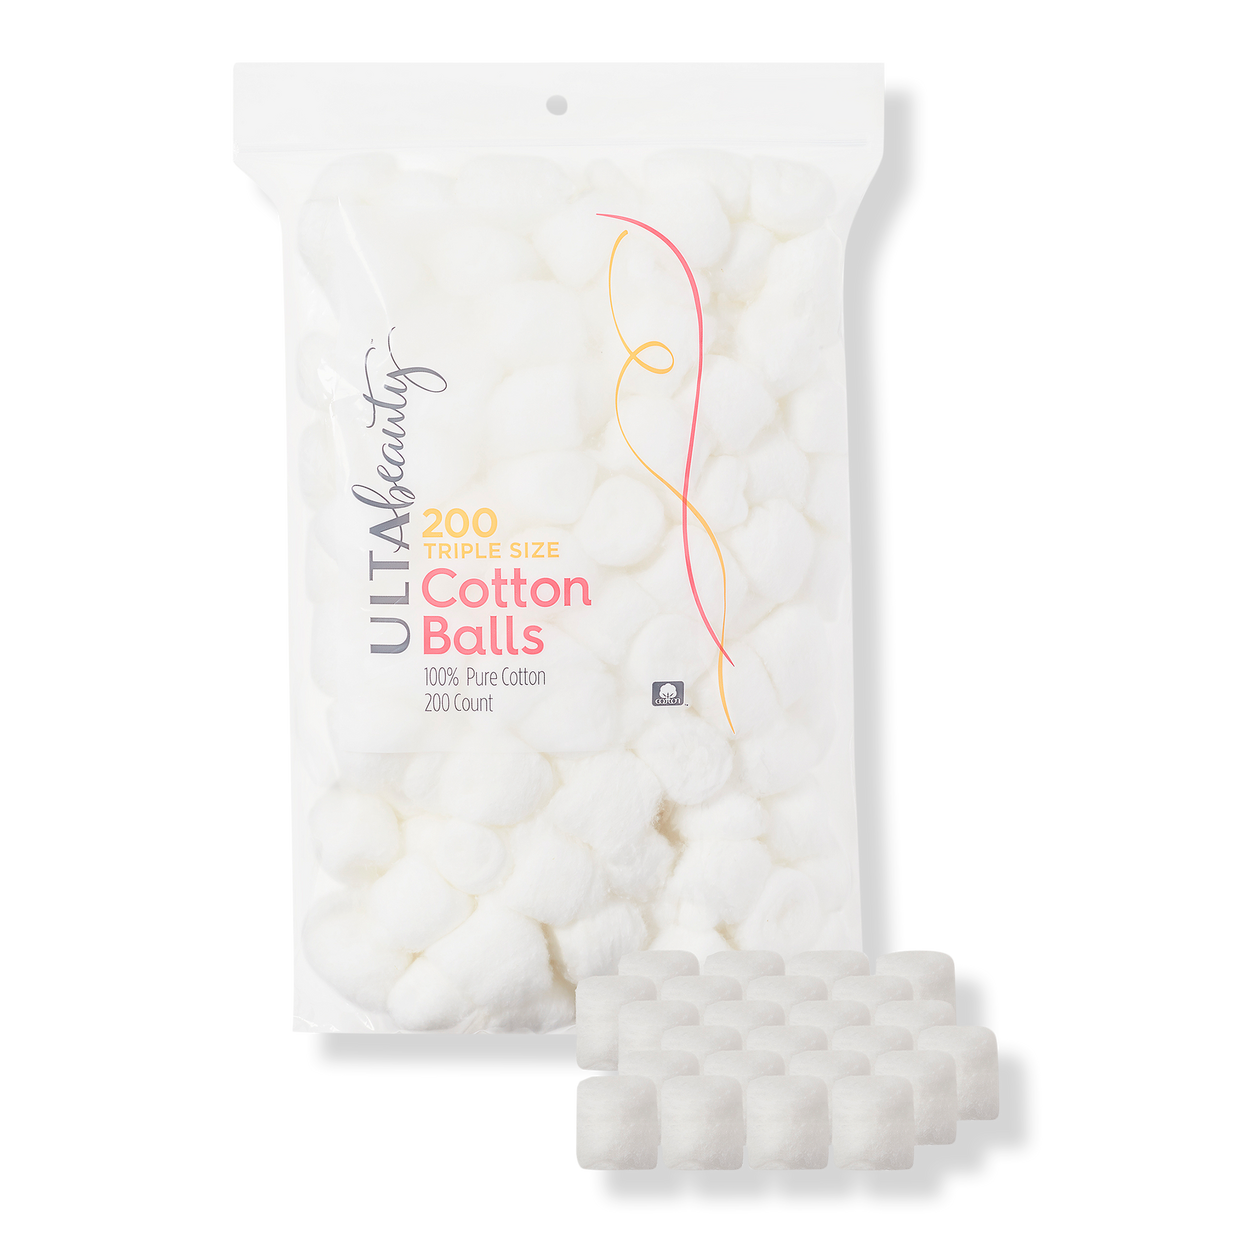 EQUATE Beauty Jumbo Soft Cotton Balls for all Skin care - Nail